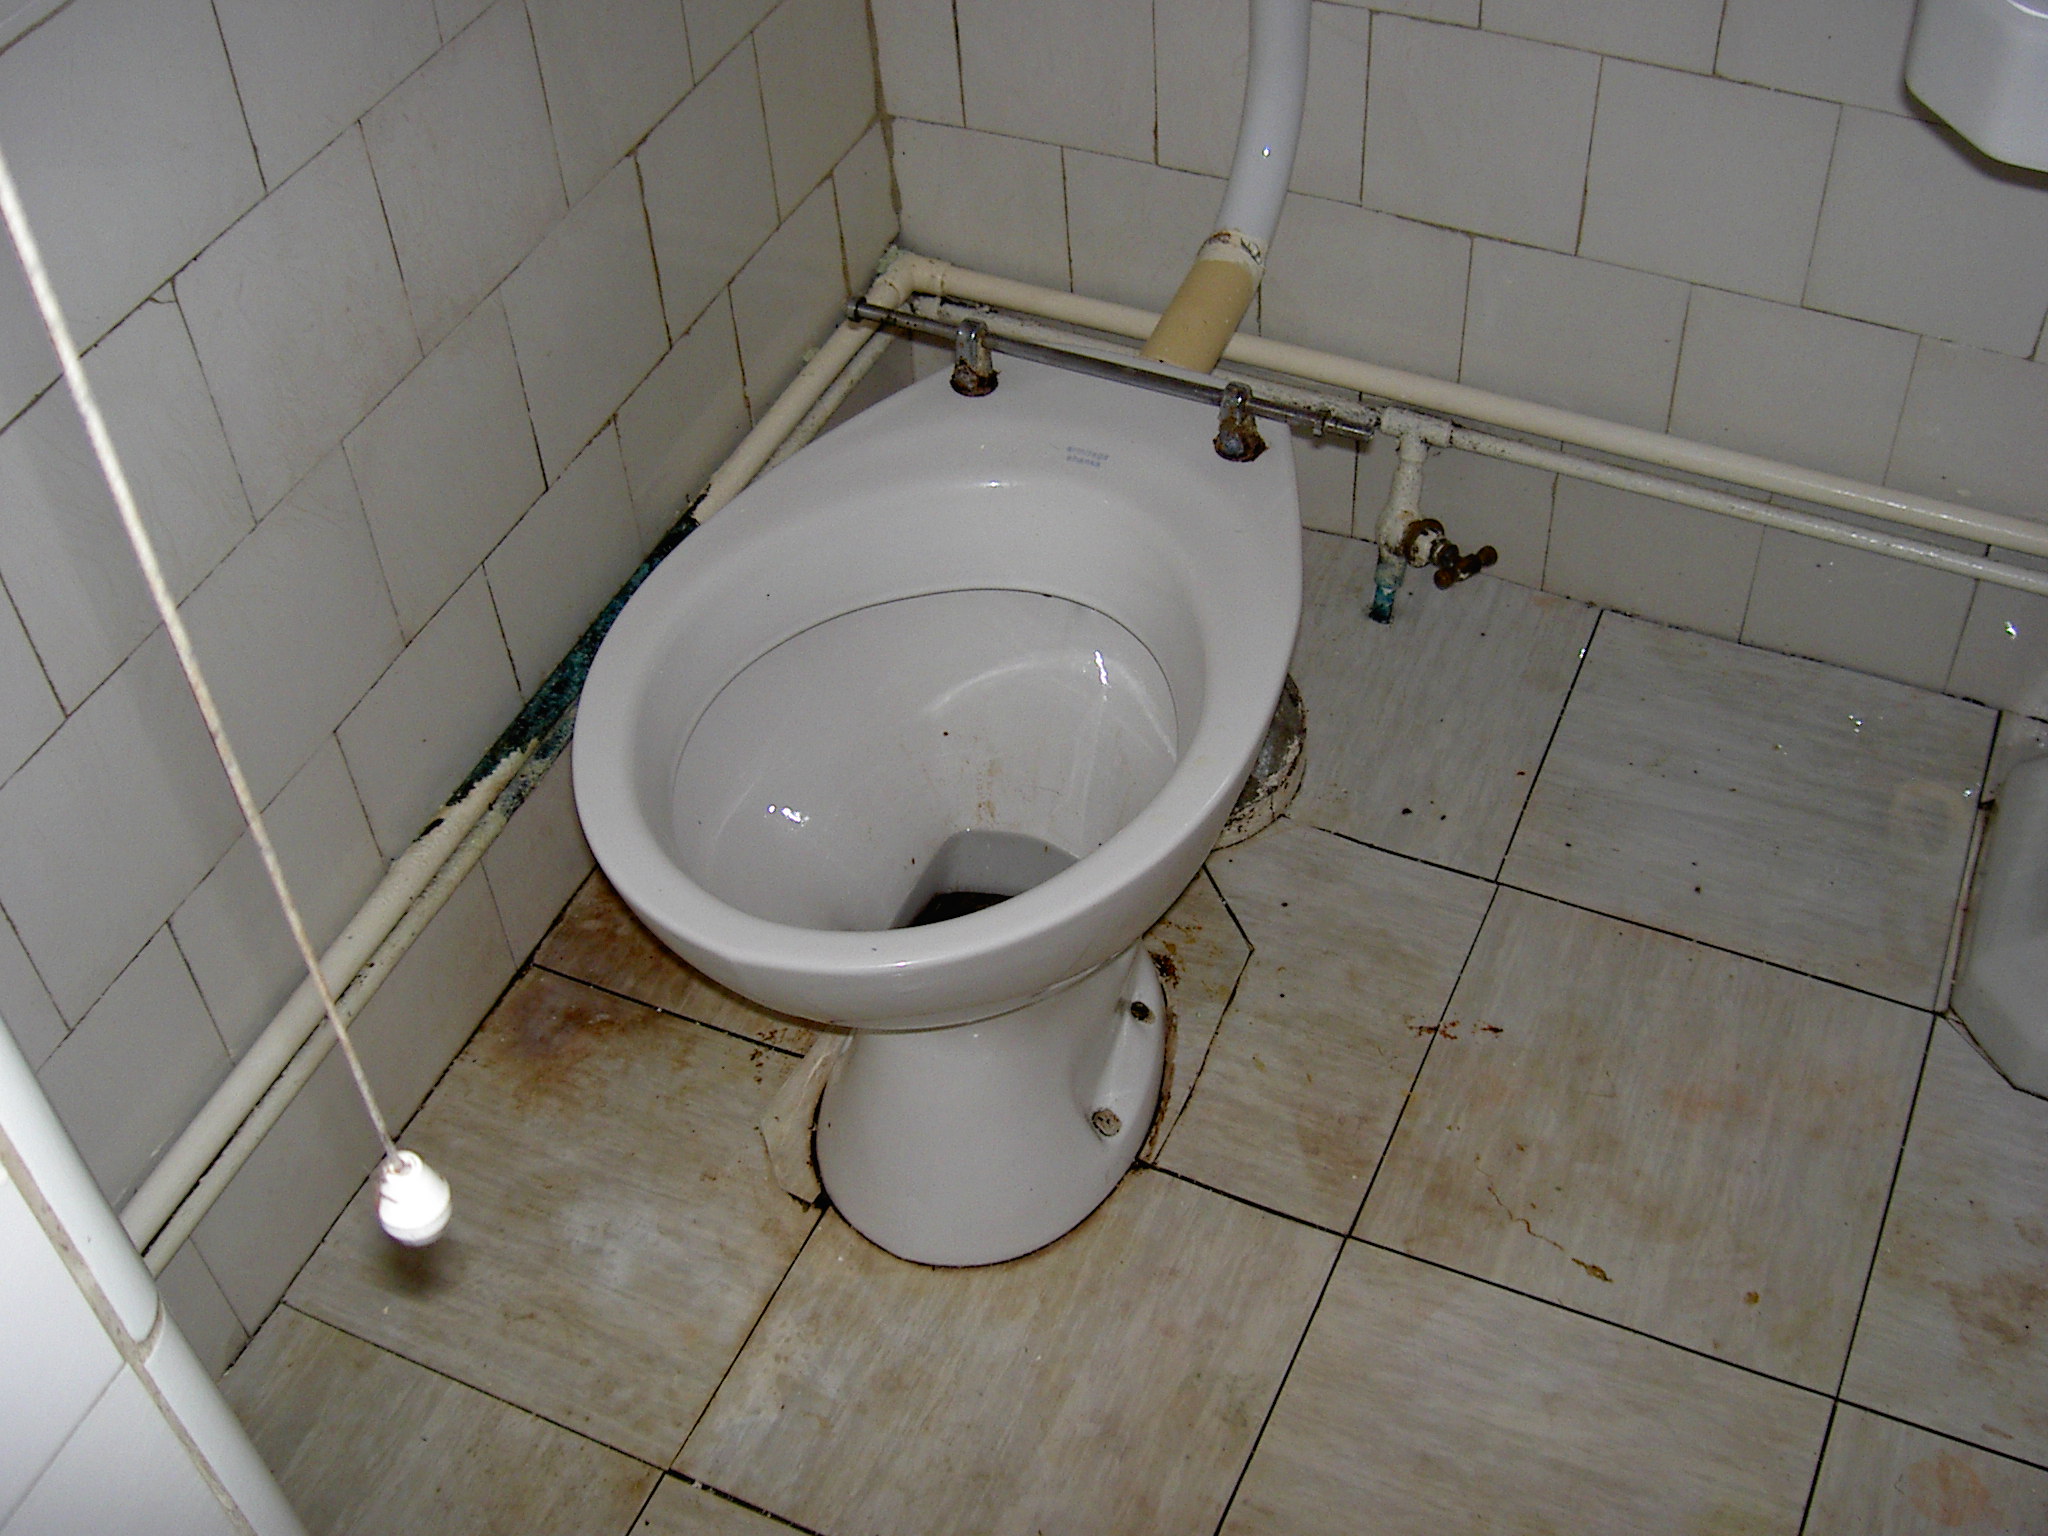 Hygienic deep clean toilet - after